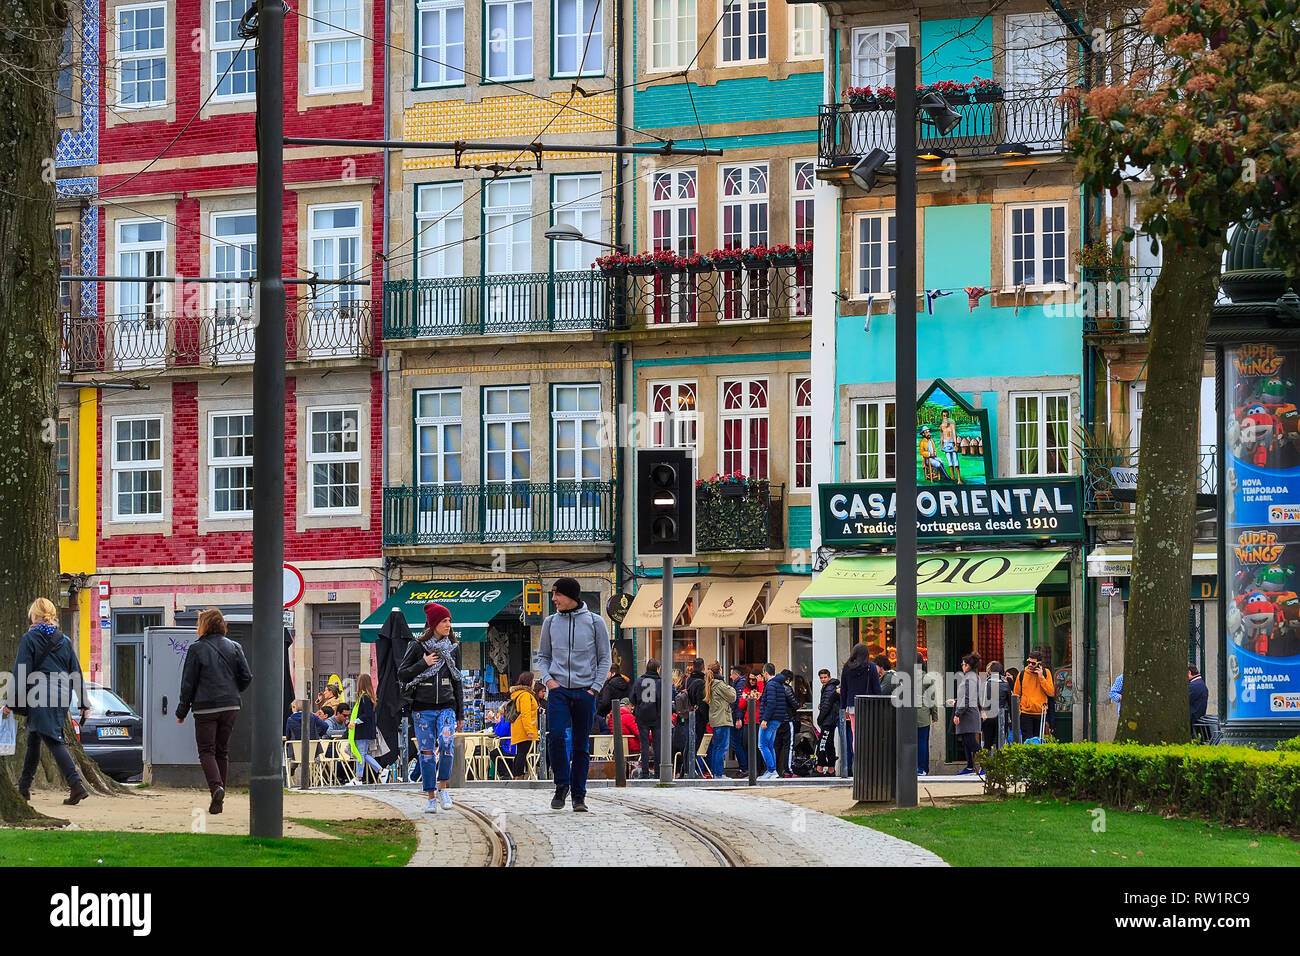 Porto, Portugal -April 1, 2018: Old town street street view with traditional colorful houses, cafe and people Stock Photo